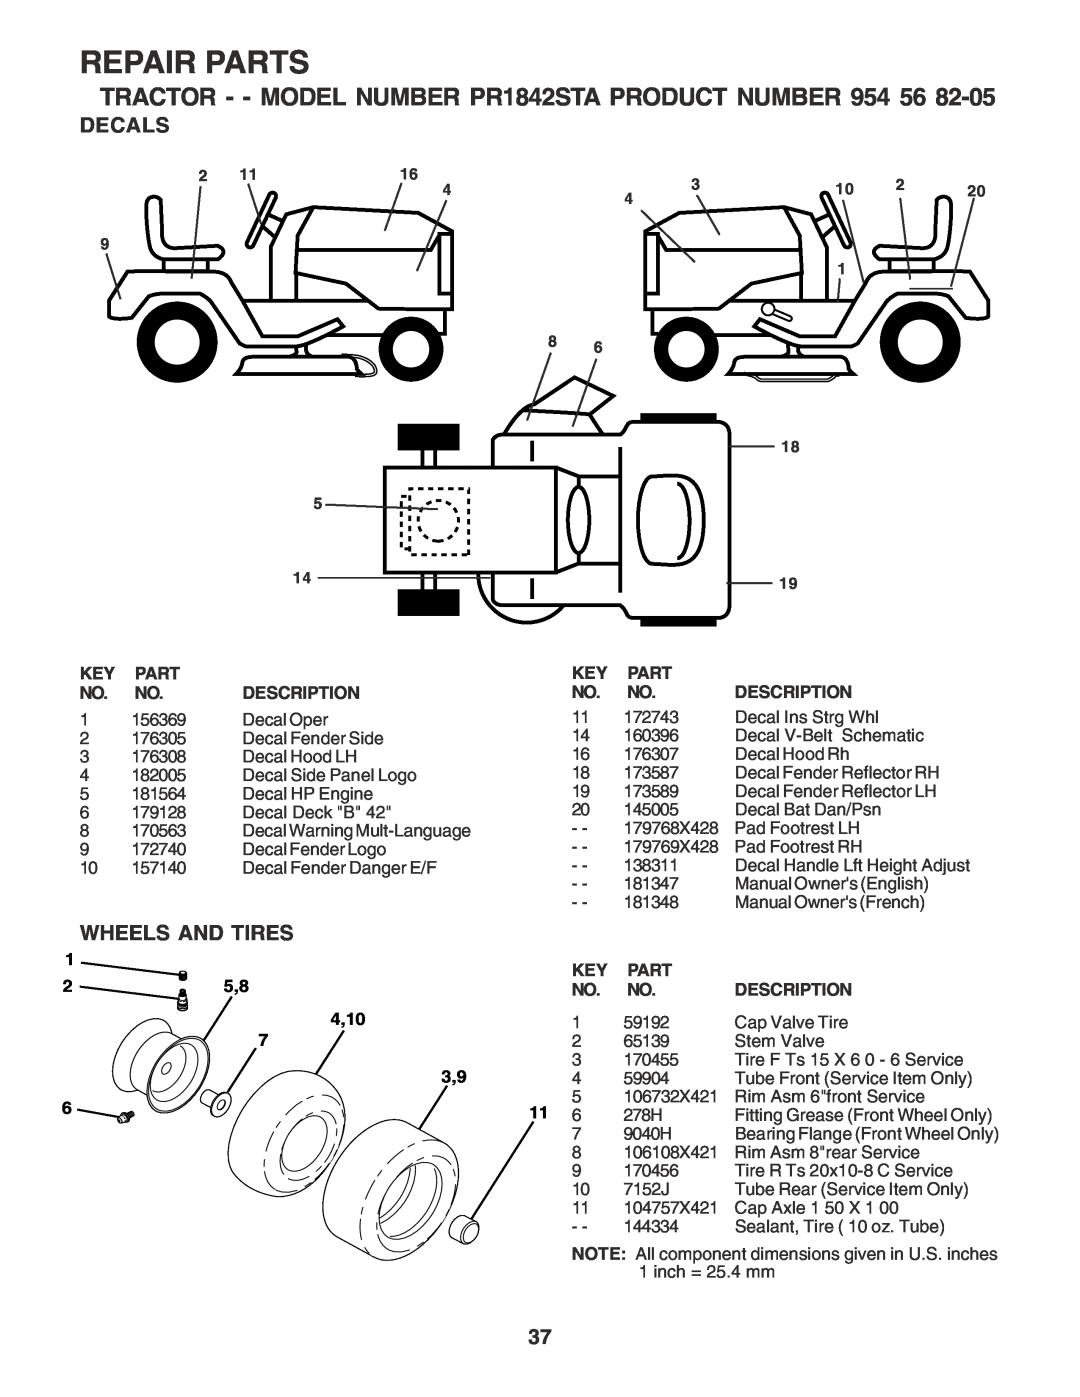 Poulan 181347 owner manual Decals, Wheels And Tires, Repair Parts, TRACTOR - - MODEL NUMBER PR1842STA PRODUCT NUMBER 954 56 